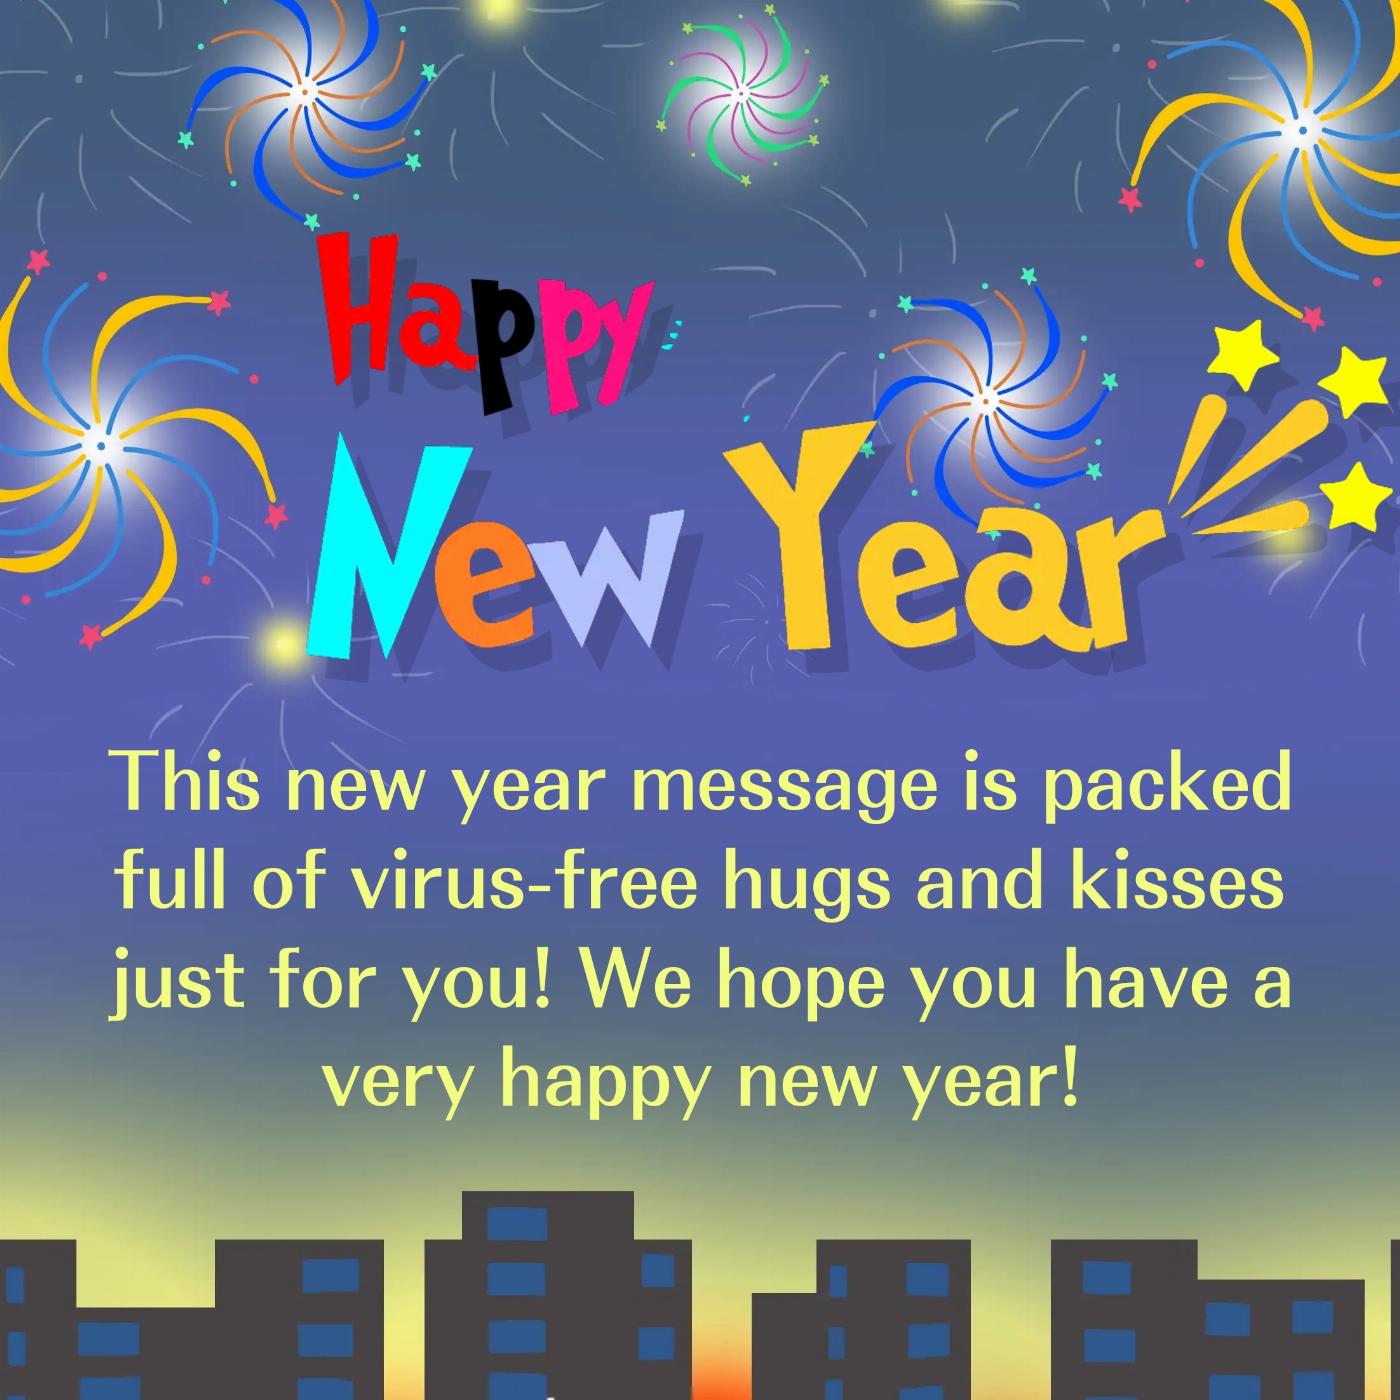 This new year message is packed full of virus-free hugs